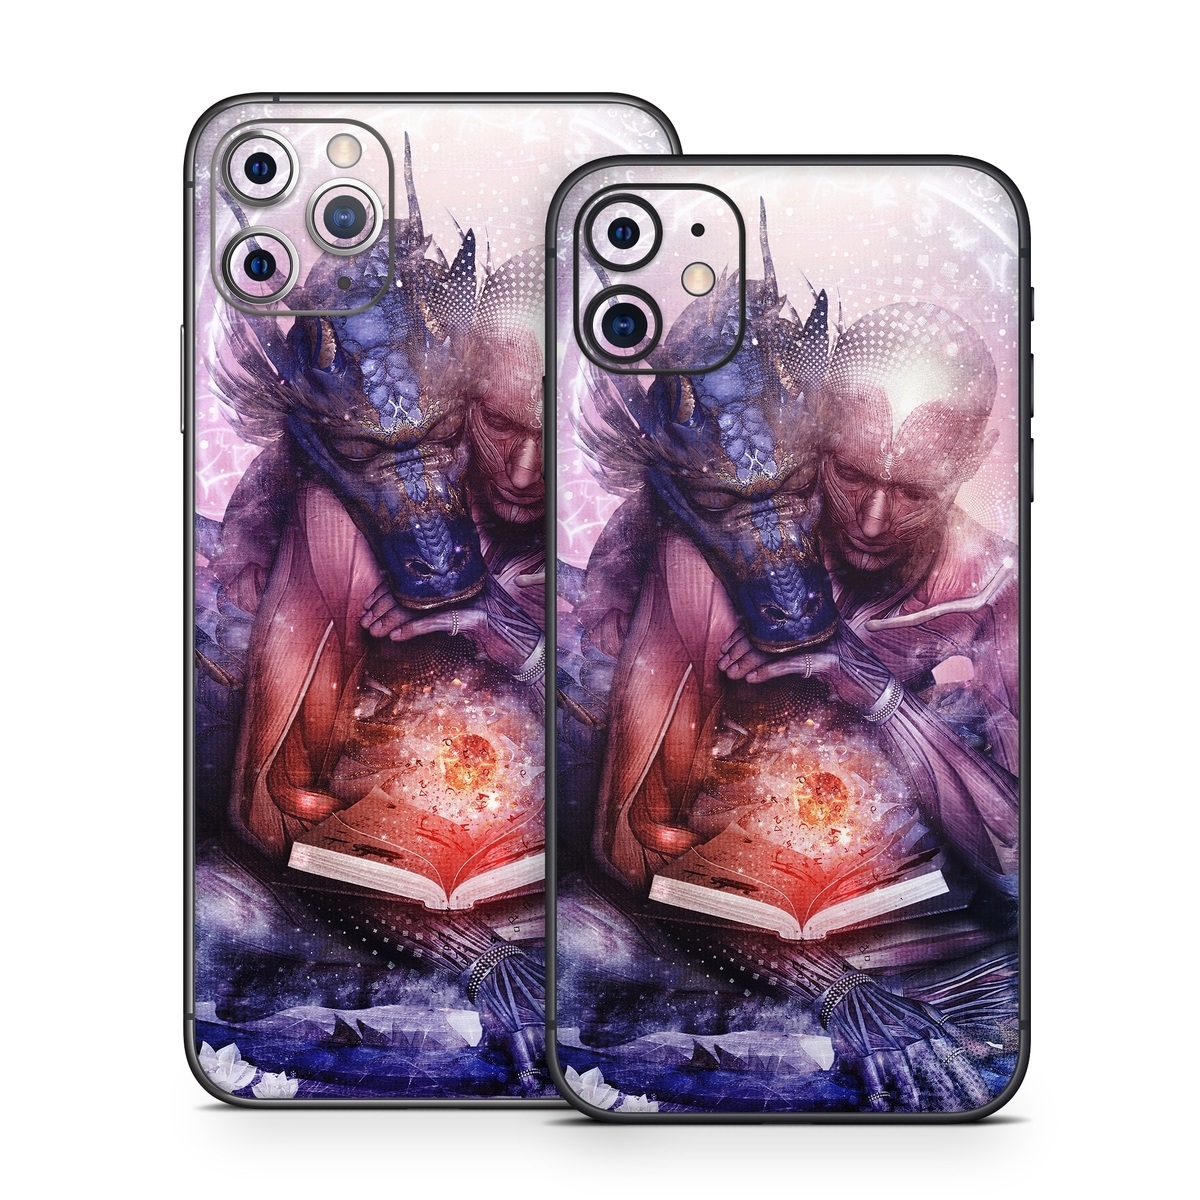 iPhone 11 Series Skin design of Cg artwork, Illustration, Graphic design, Fictional character, Mythology, Graphics, Space, Art, Darkness, with blue, black, red, yellow, white colors